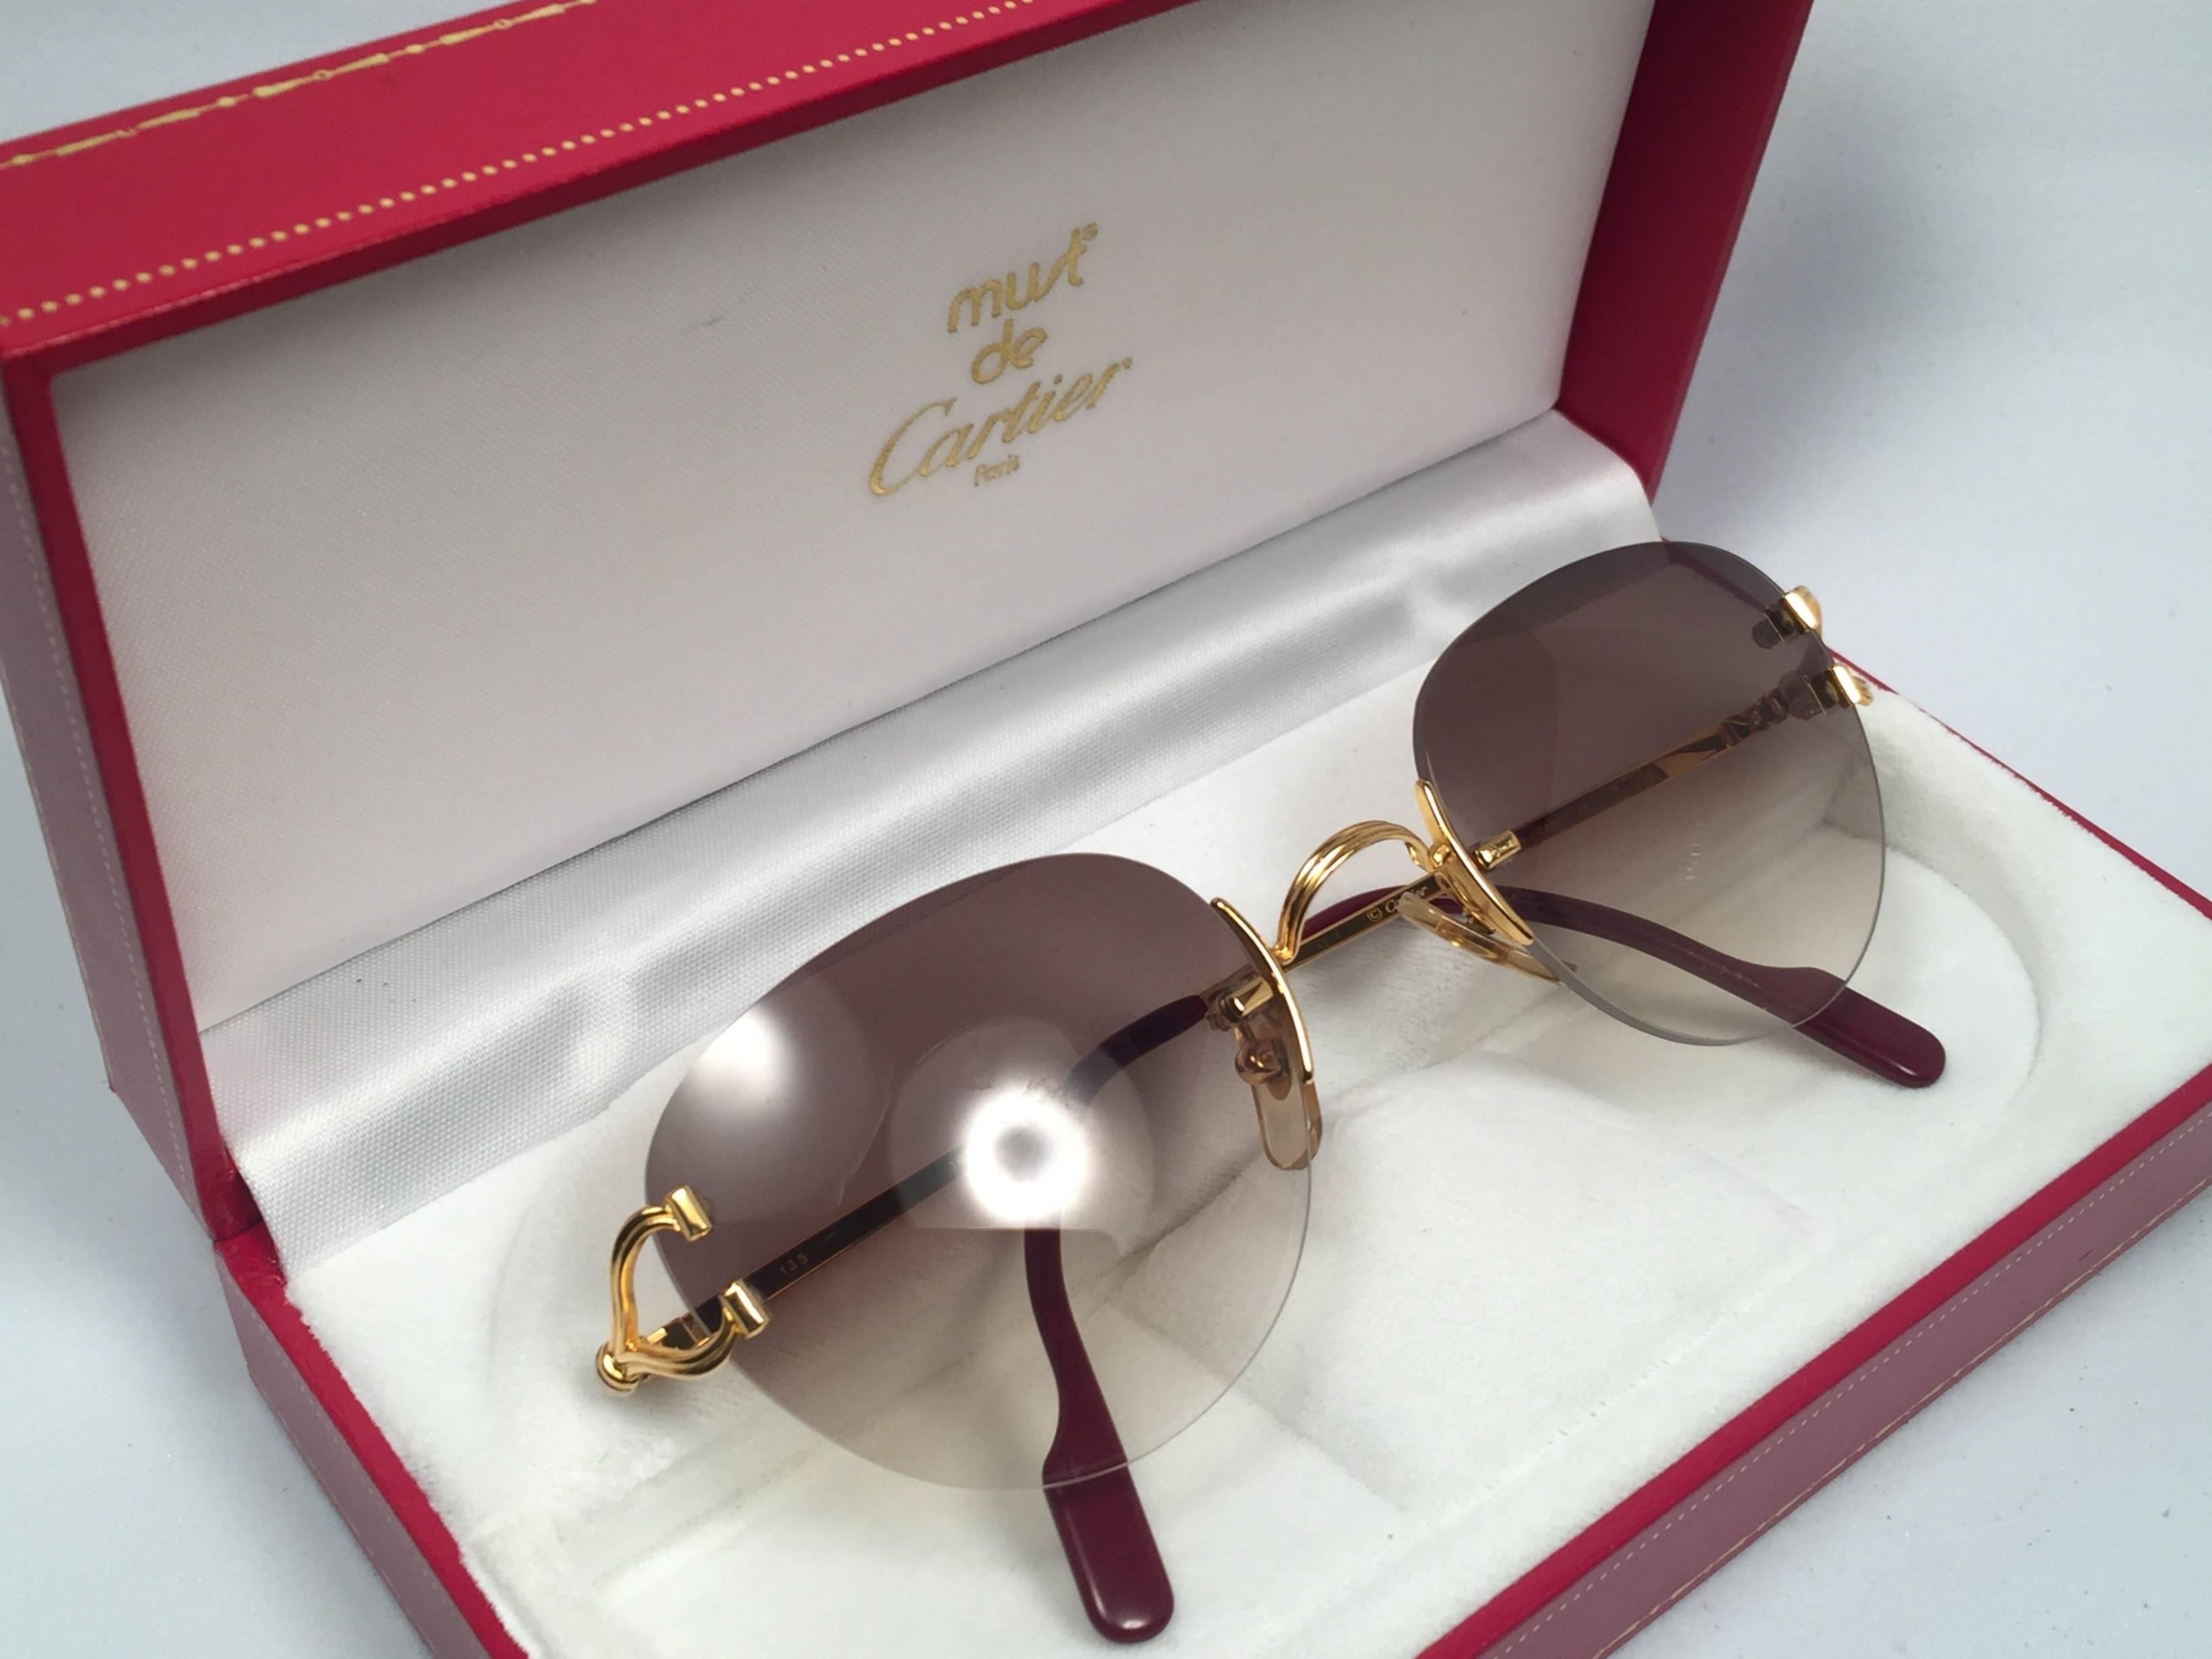 New Cartier Salisbury unique rimless special edition sunglasses with brown gradient (uv protection) lenses. Frame with the front and sides in gold. All hallmarks. Cartier gold signs on the ear paddles. These are like a pair of jewels on your nose.